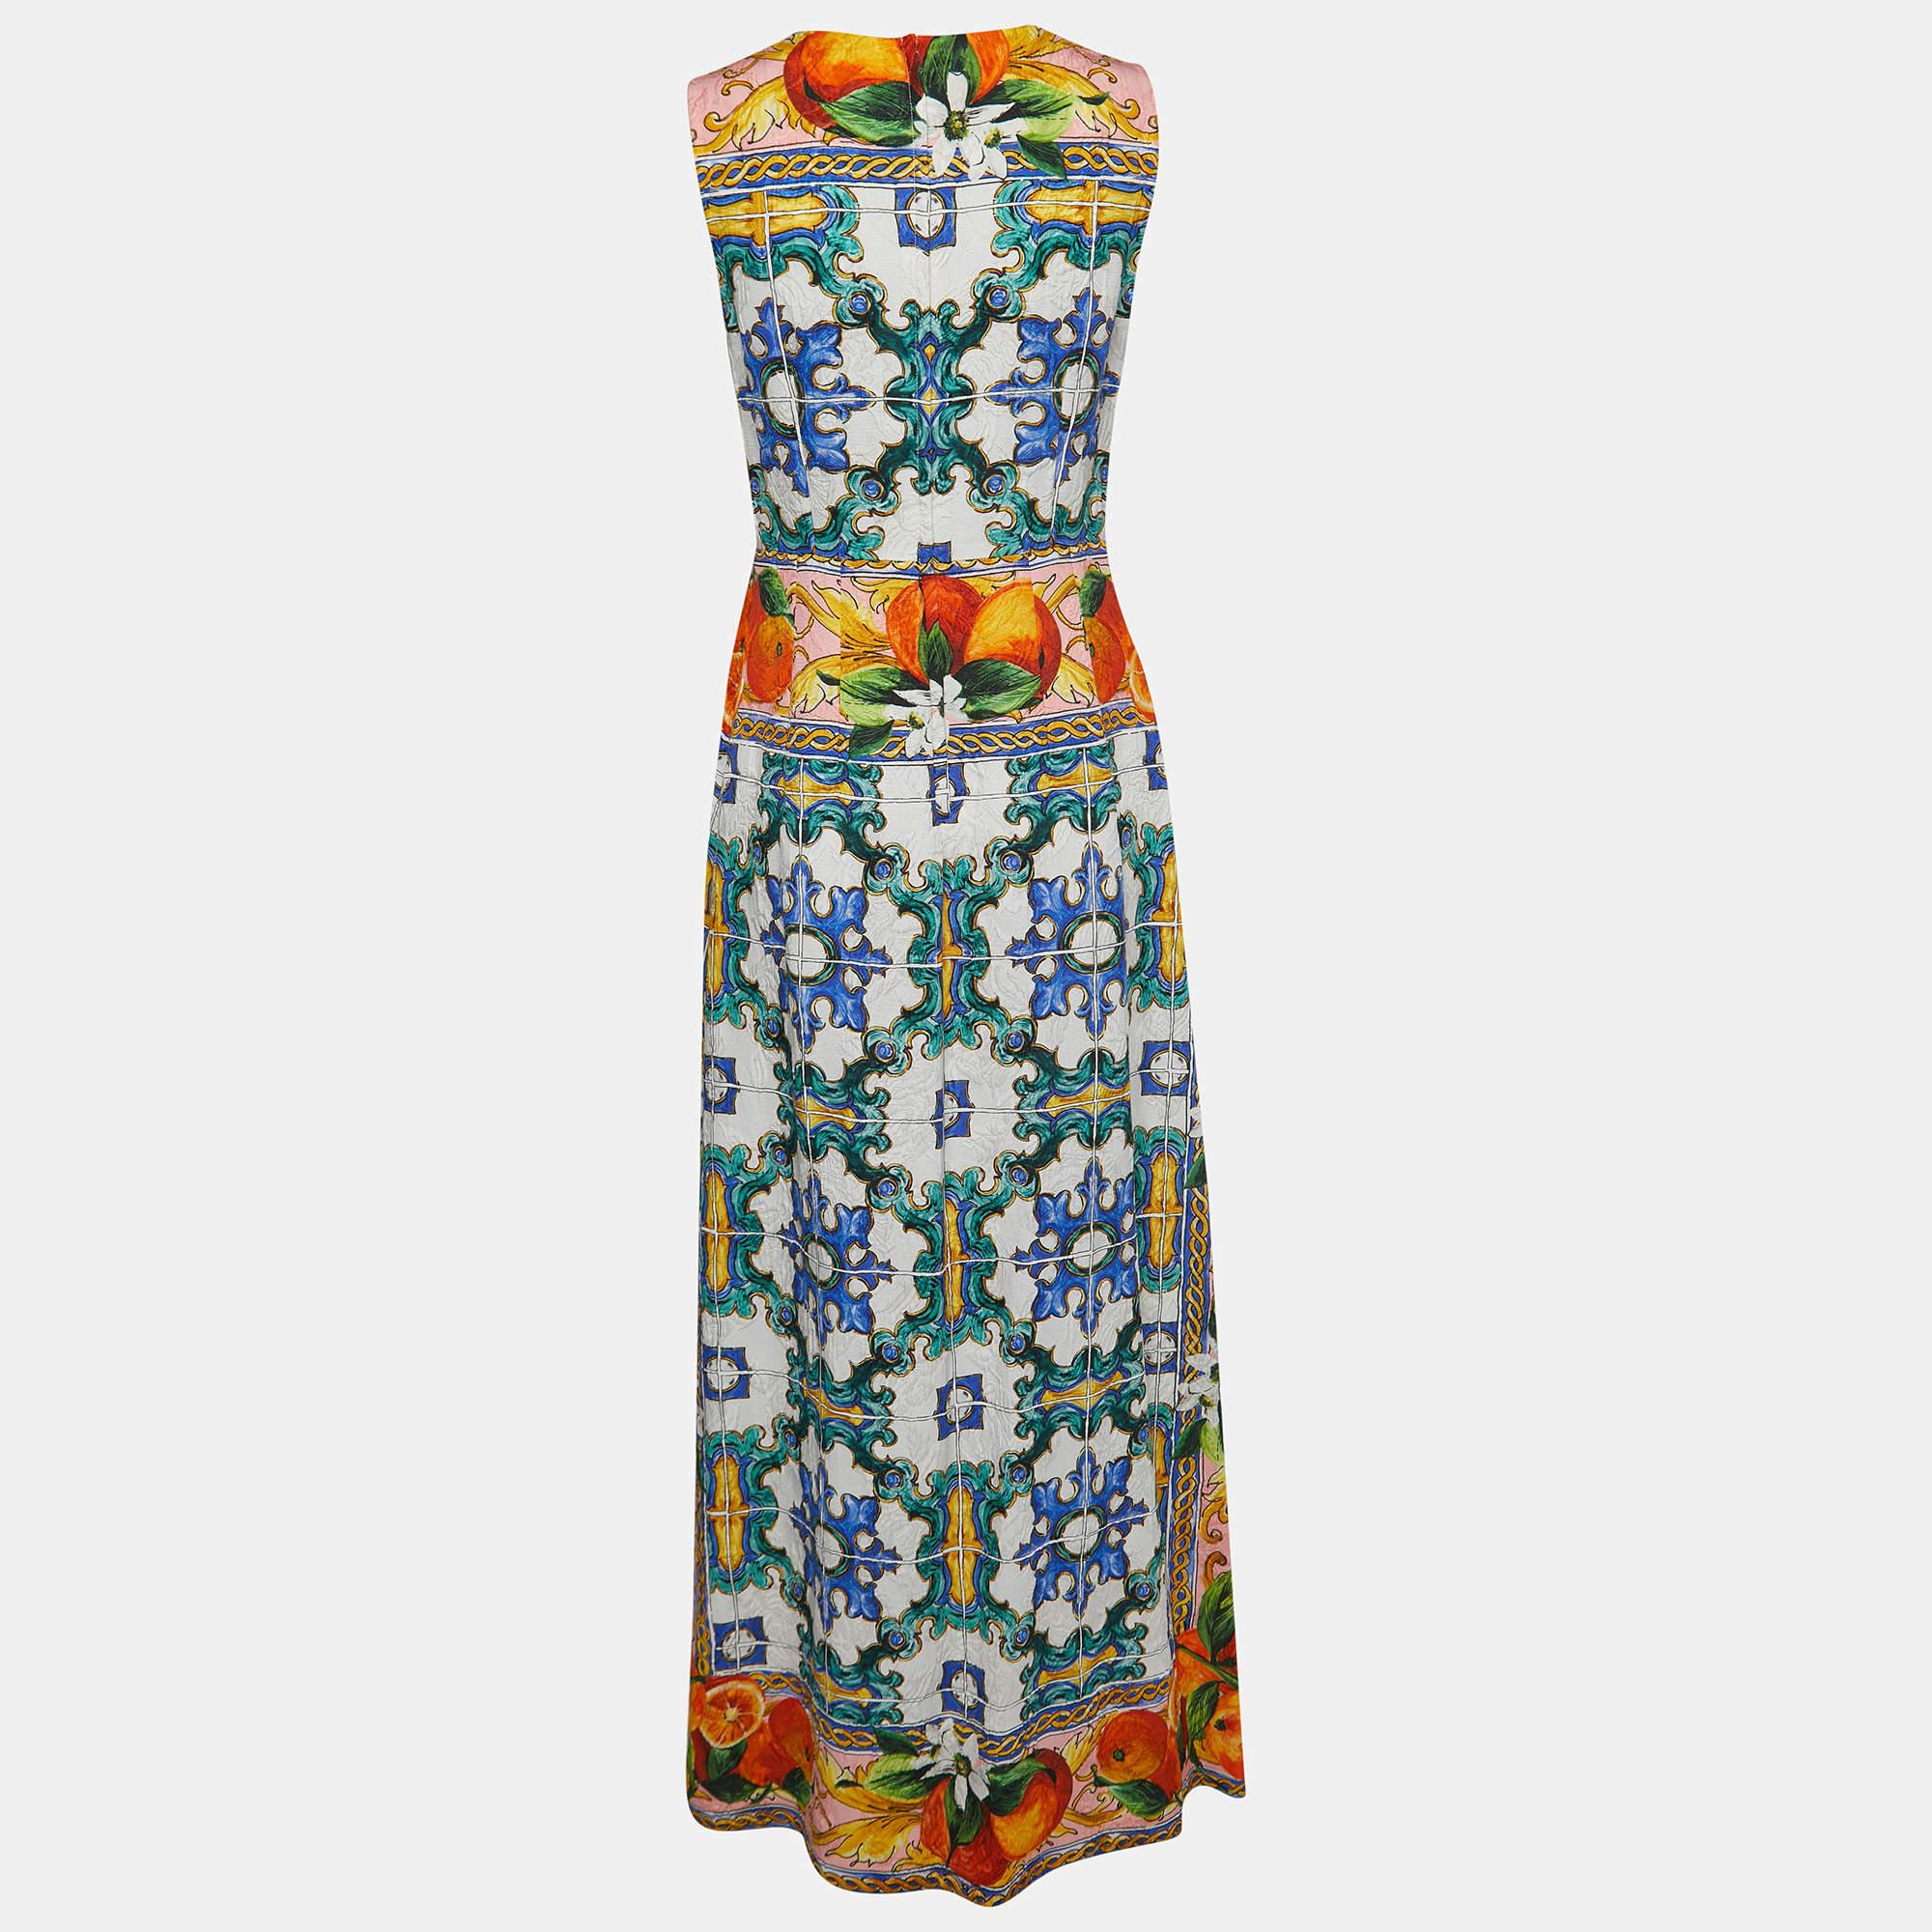 The Dolce & Gabbana dress is a stunning blend of vibrant colors and intricate patterns inspired by Sicilian culture. This sleeveless midi dress features a unique print resembling traditional Sicilian tiles, creating a visually striking and artistic